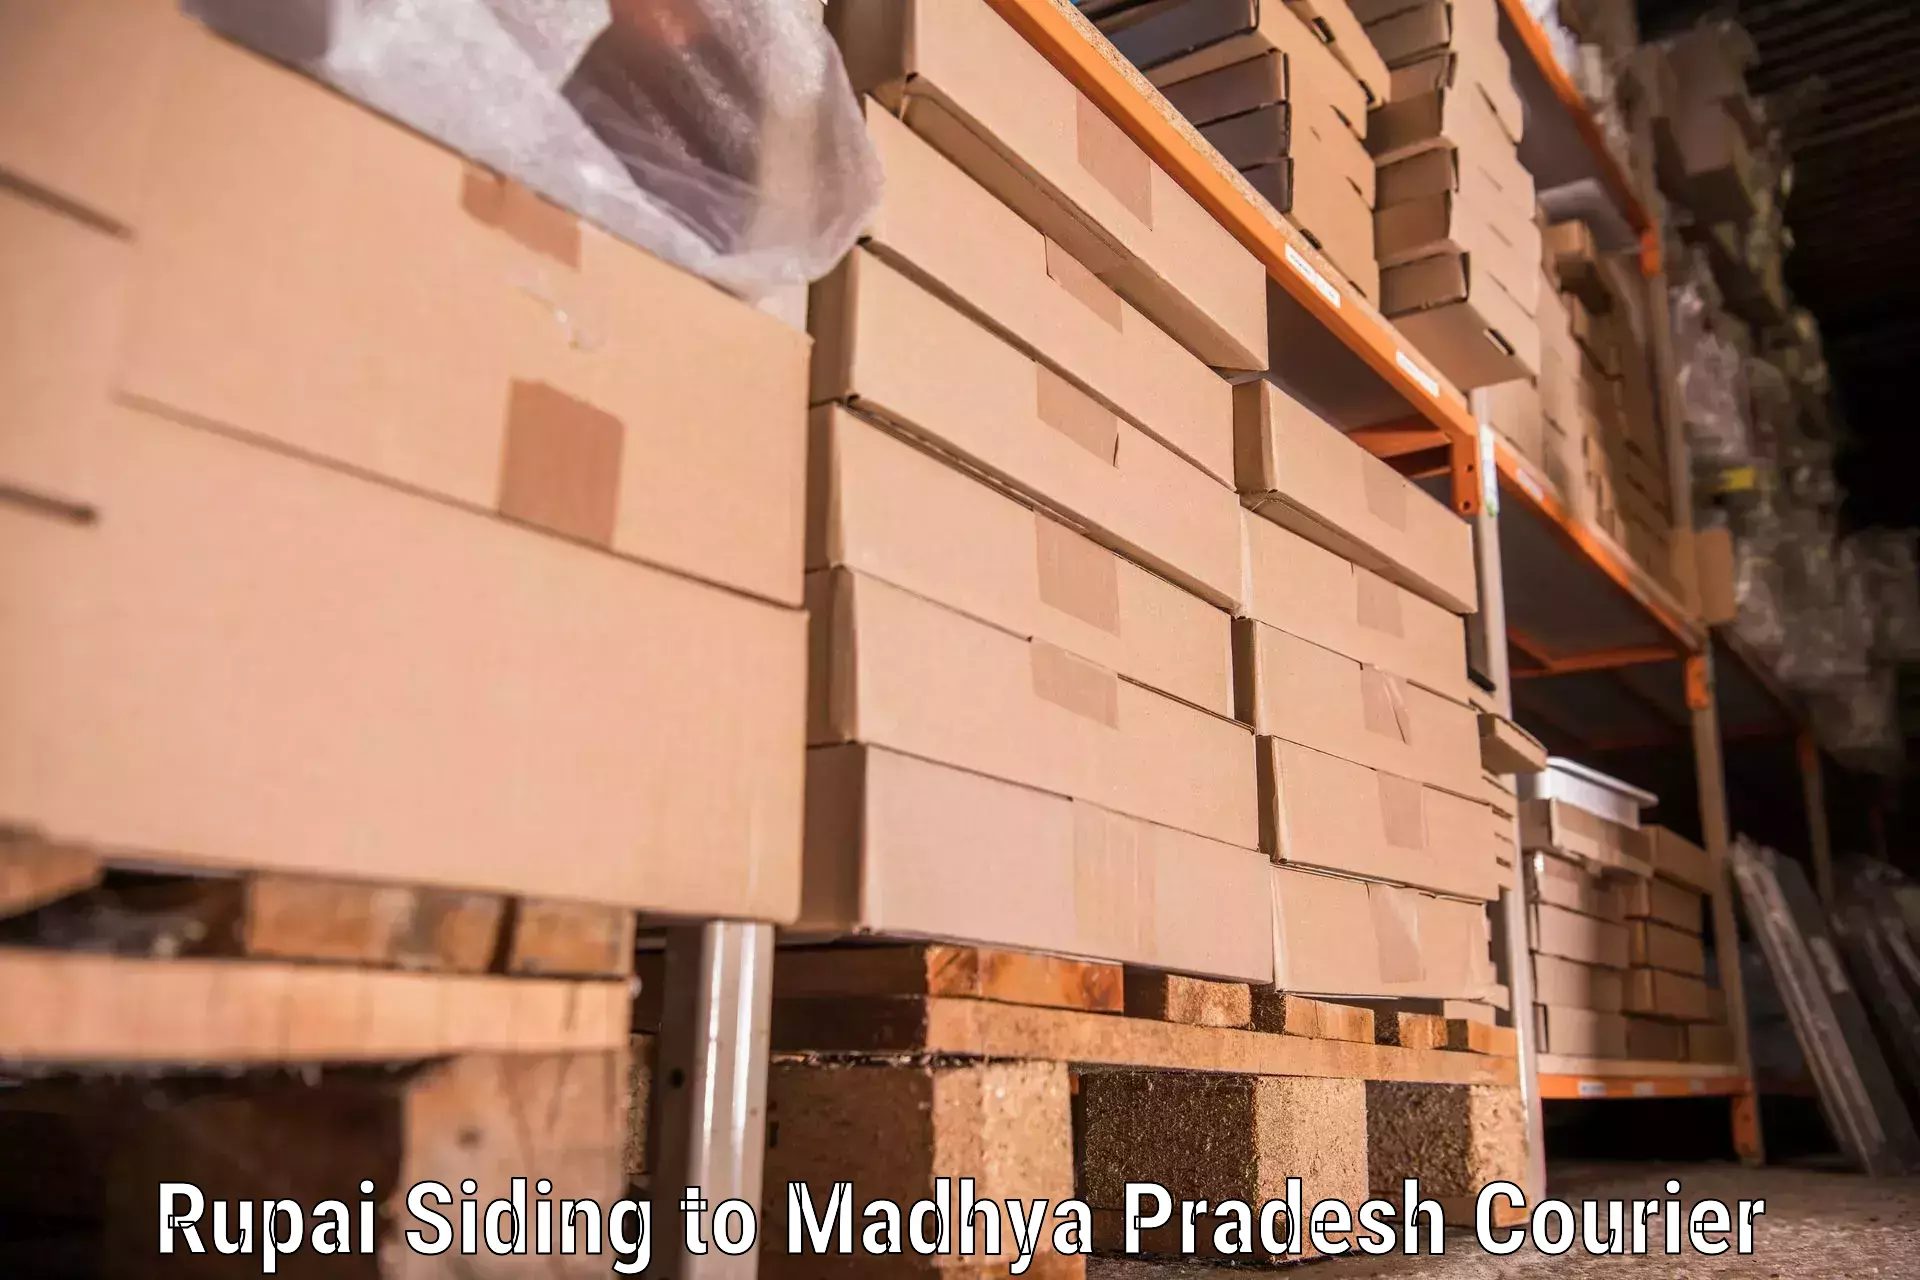 Furniture transport experts in Rupai Siding to Indore